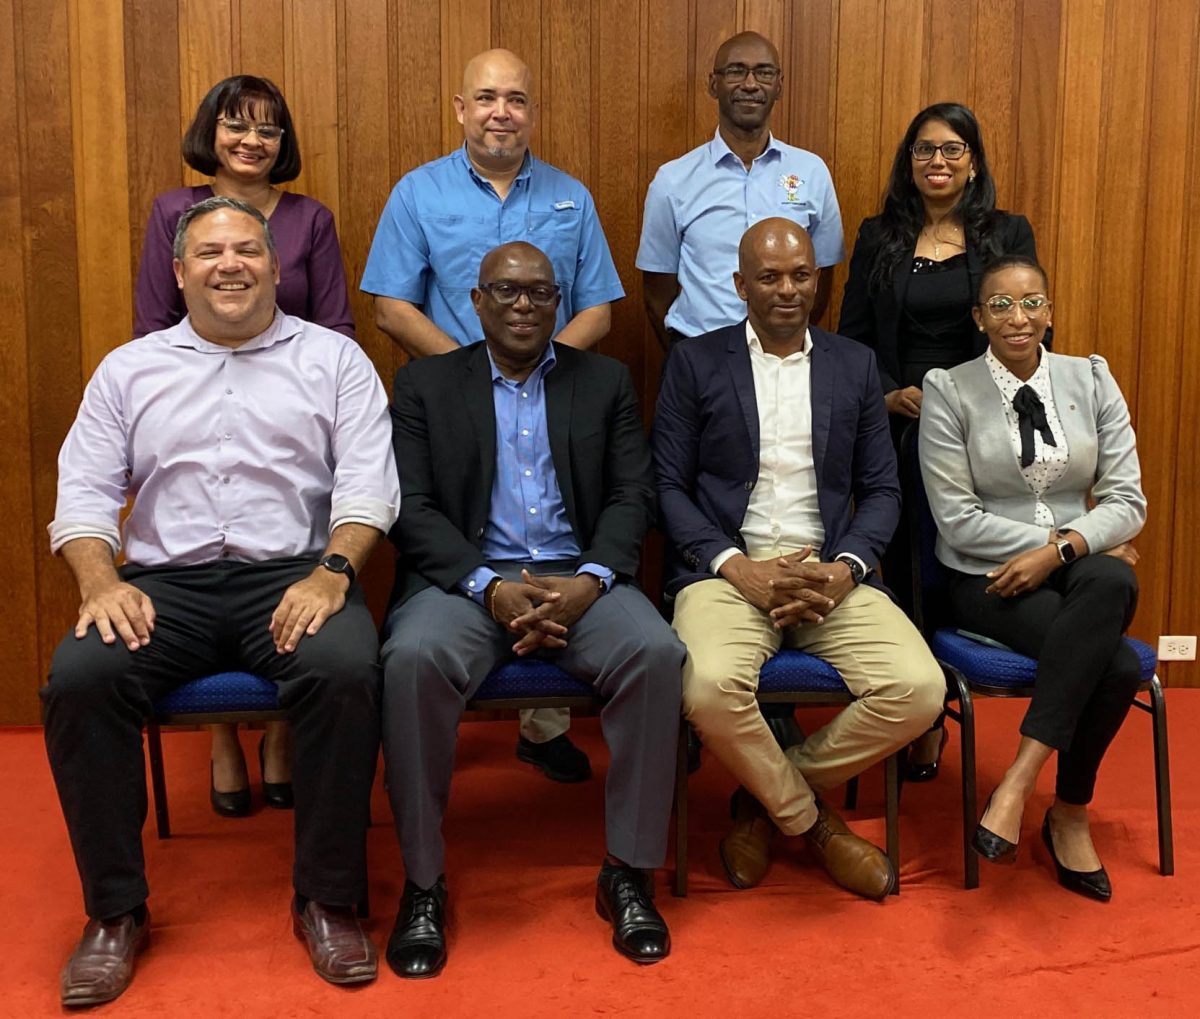 The Guyana Olympic Association is now headed by Godfrey Munroe, (seated second from right). He is flanked by executive members, Vice Presidents, from left, Philip Fernandes, Steve Ninvalle and Cristy Campbell. Standing (from left) are Emelia Ramdhani, Mike Singh, Garfield Wiltshire and Vidushi Persaud-McKinnon. (Emmerson Campbell photo)